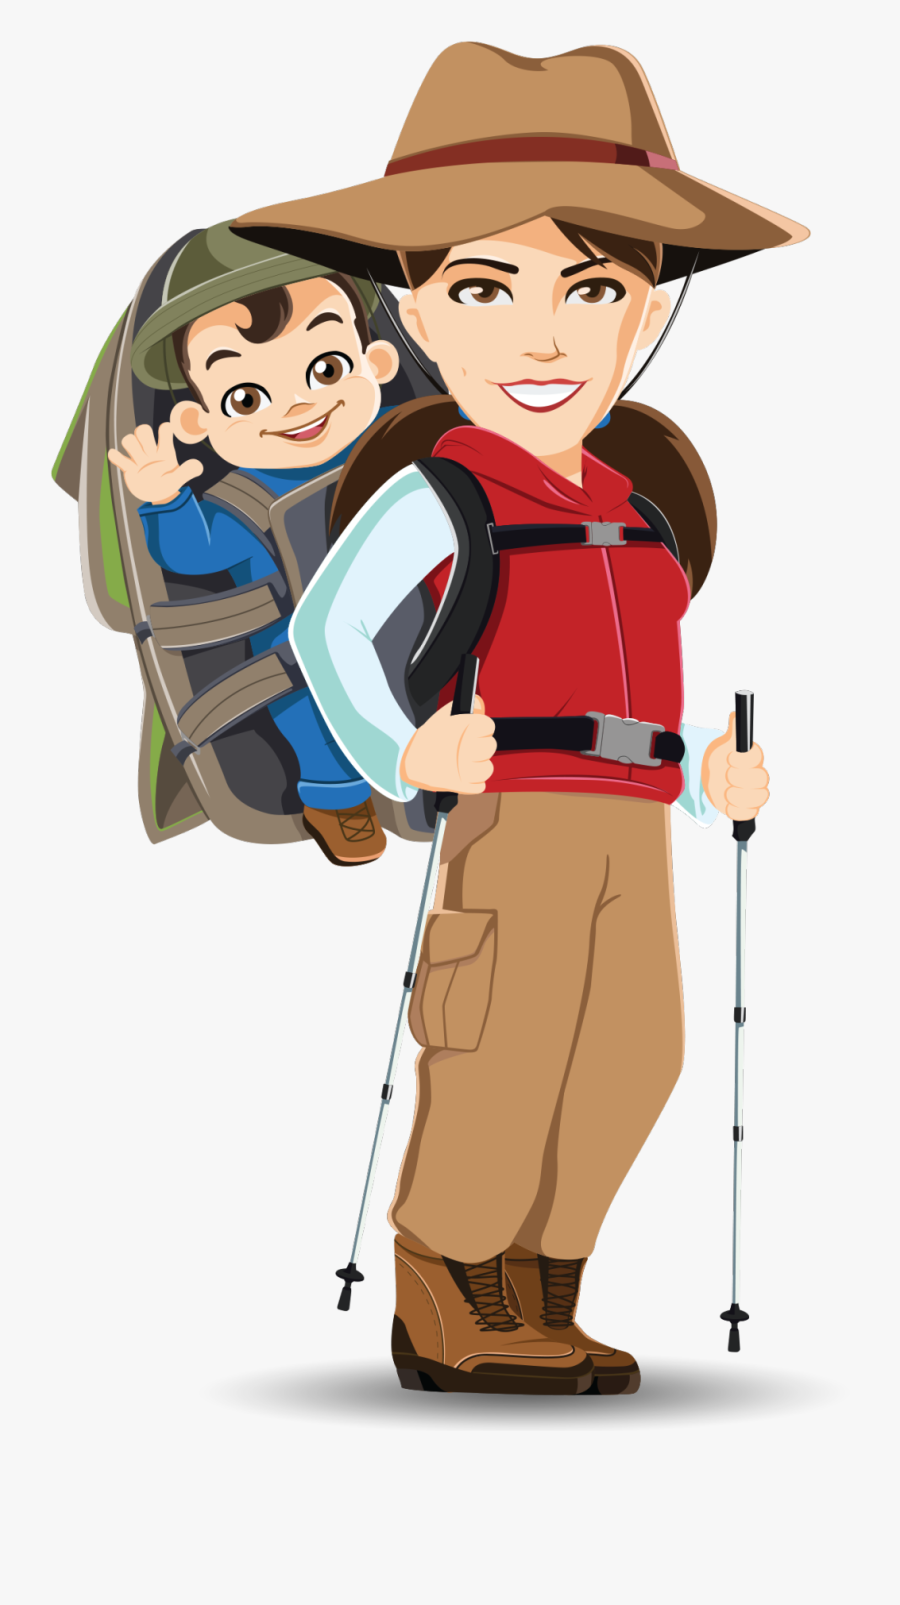 Baby In Car Seat Clipart - Hiking With Baby Clip Art, Transparent Clipart